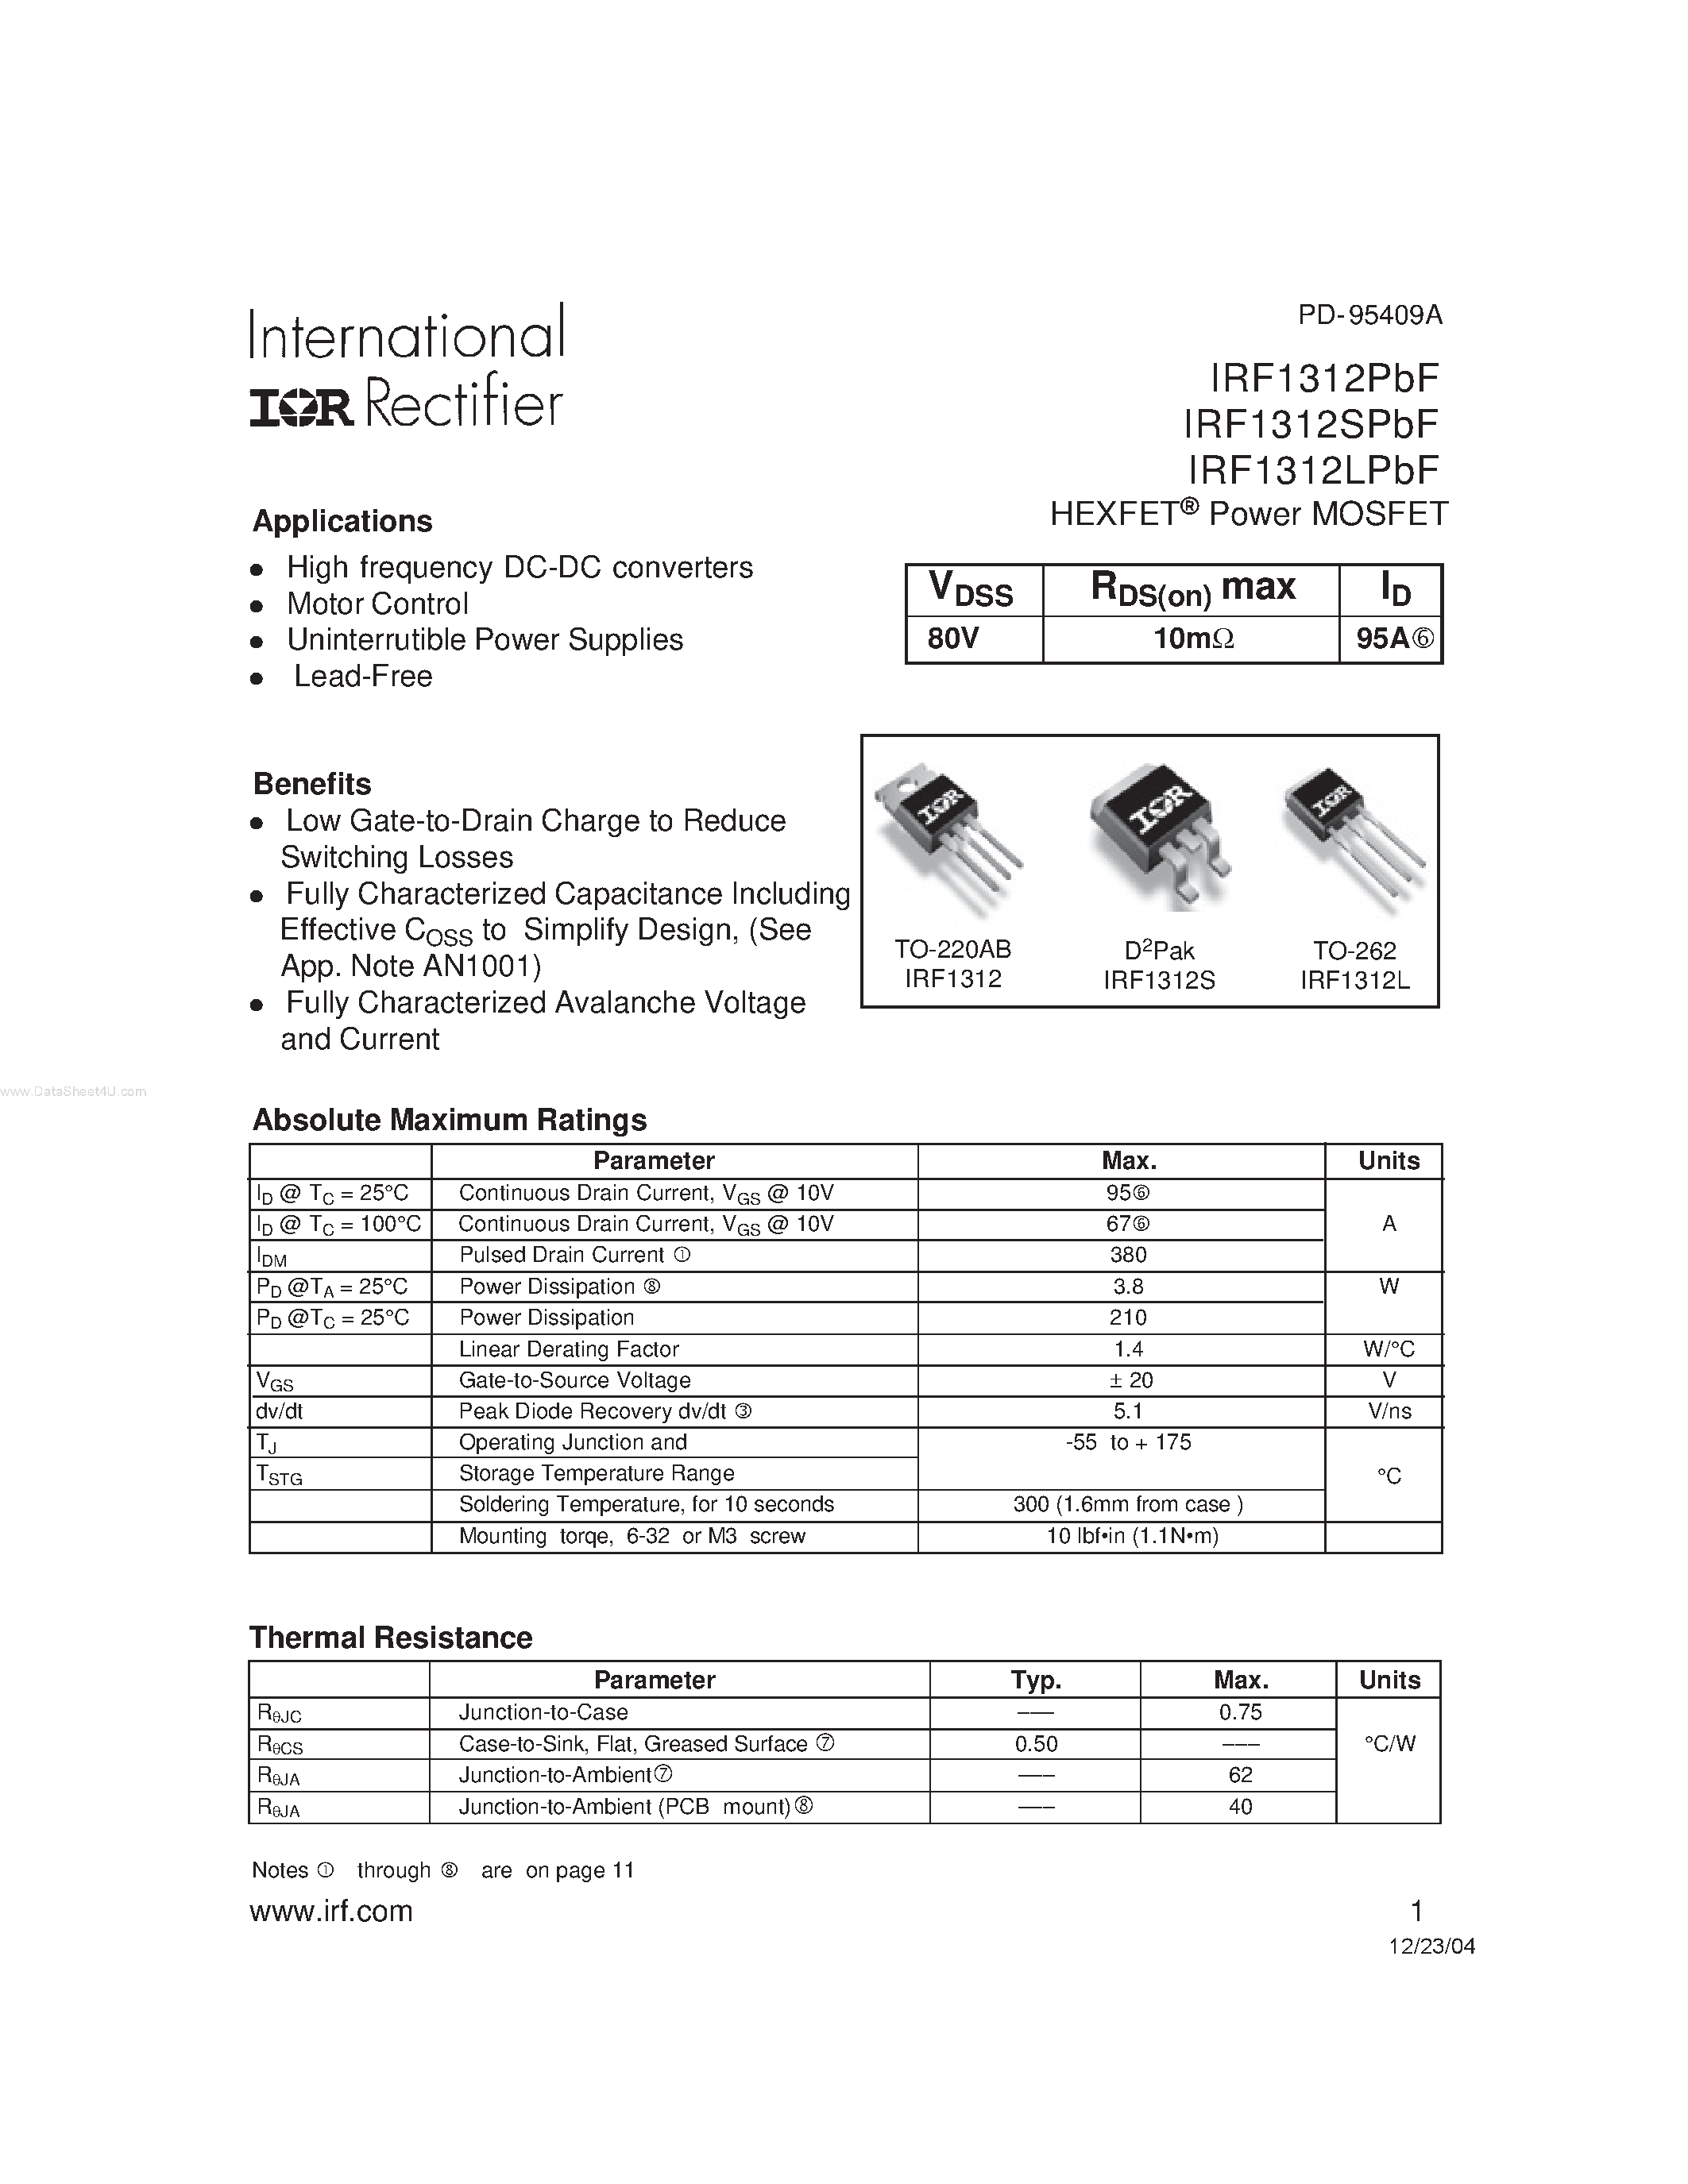 Даташит IRF1312LPbF-(IRF1312xPbF) HEXFET Power MOSFET страница 1